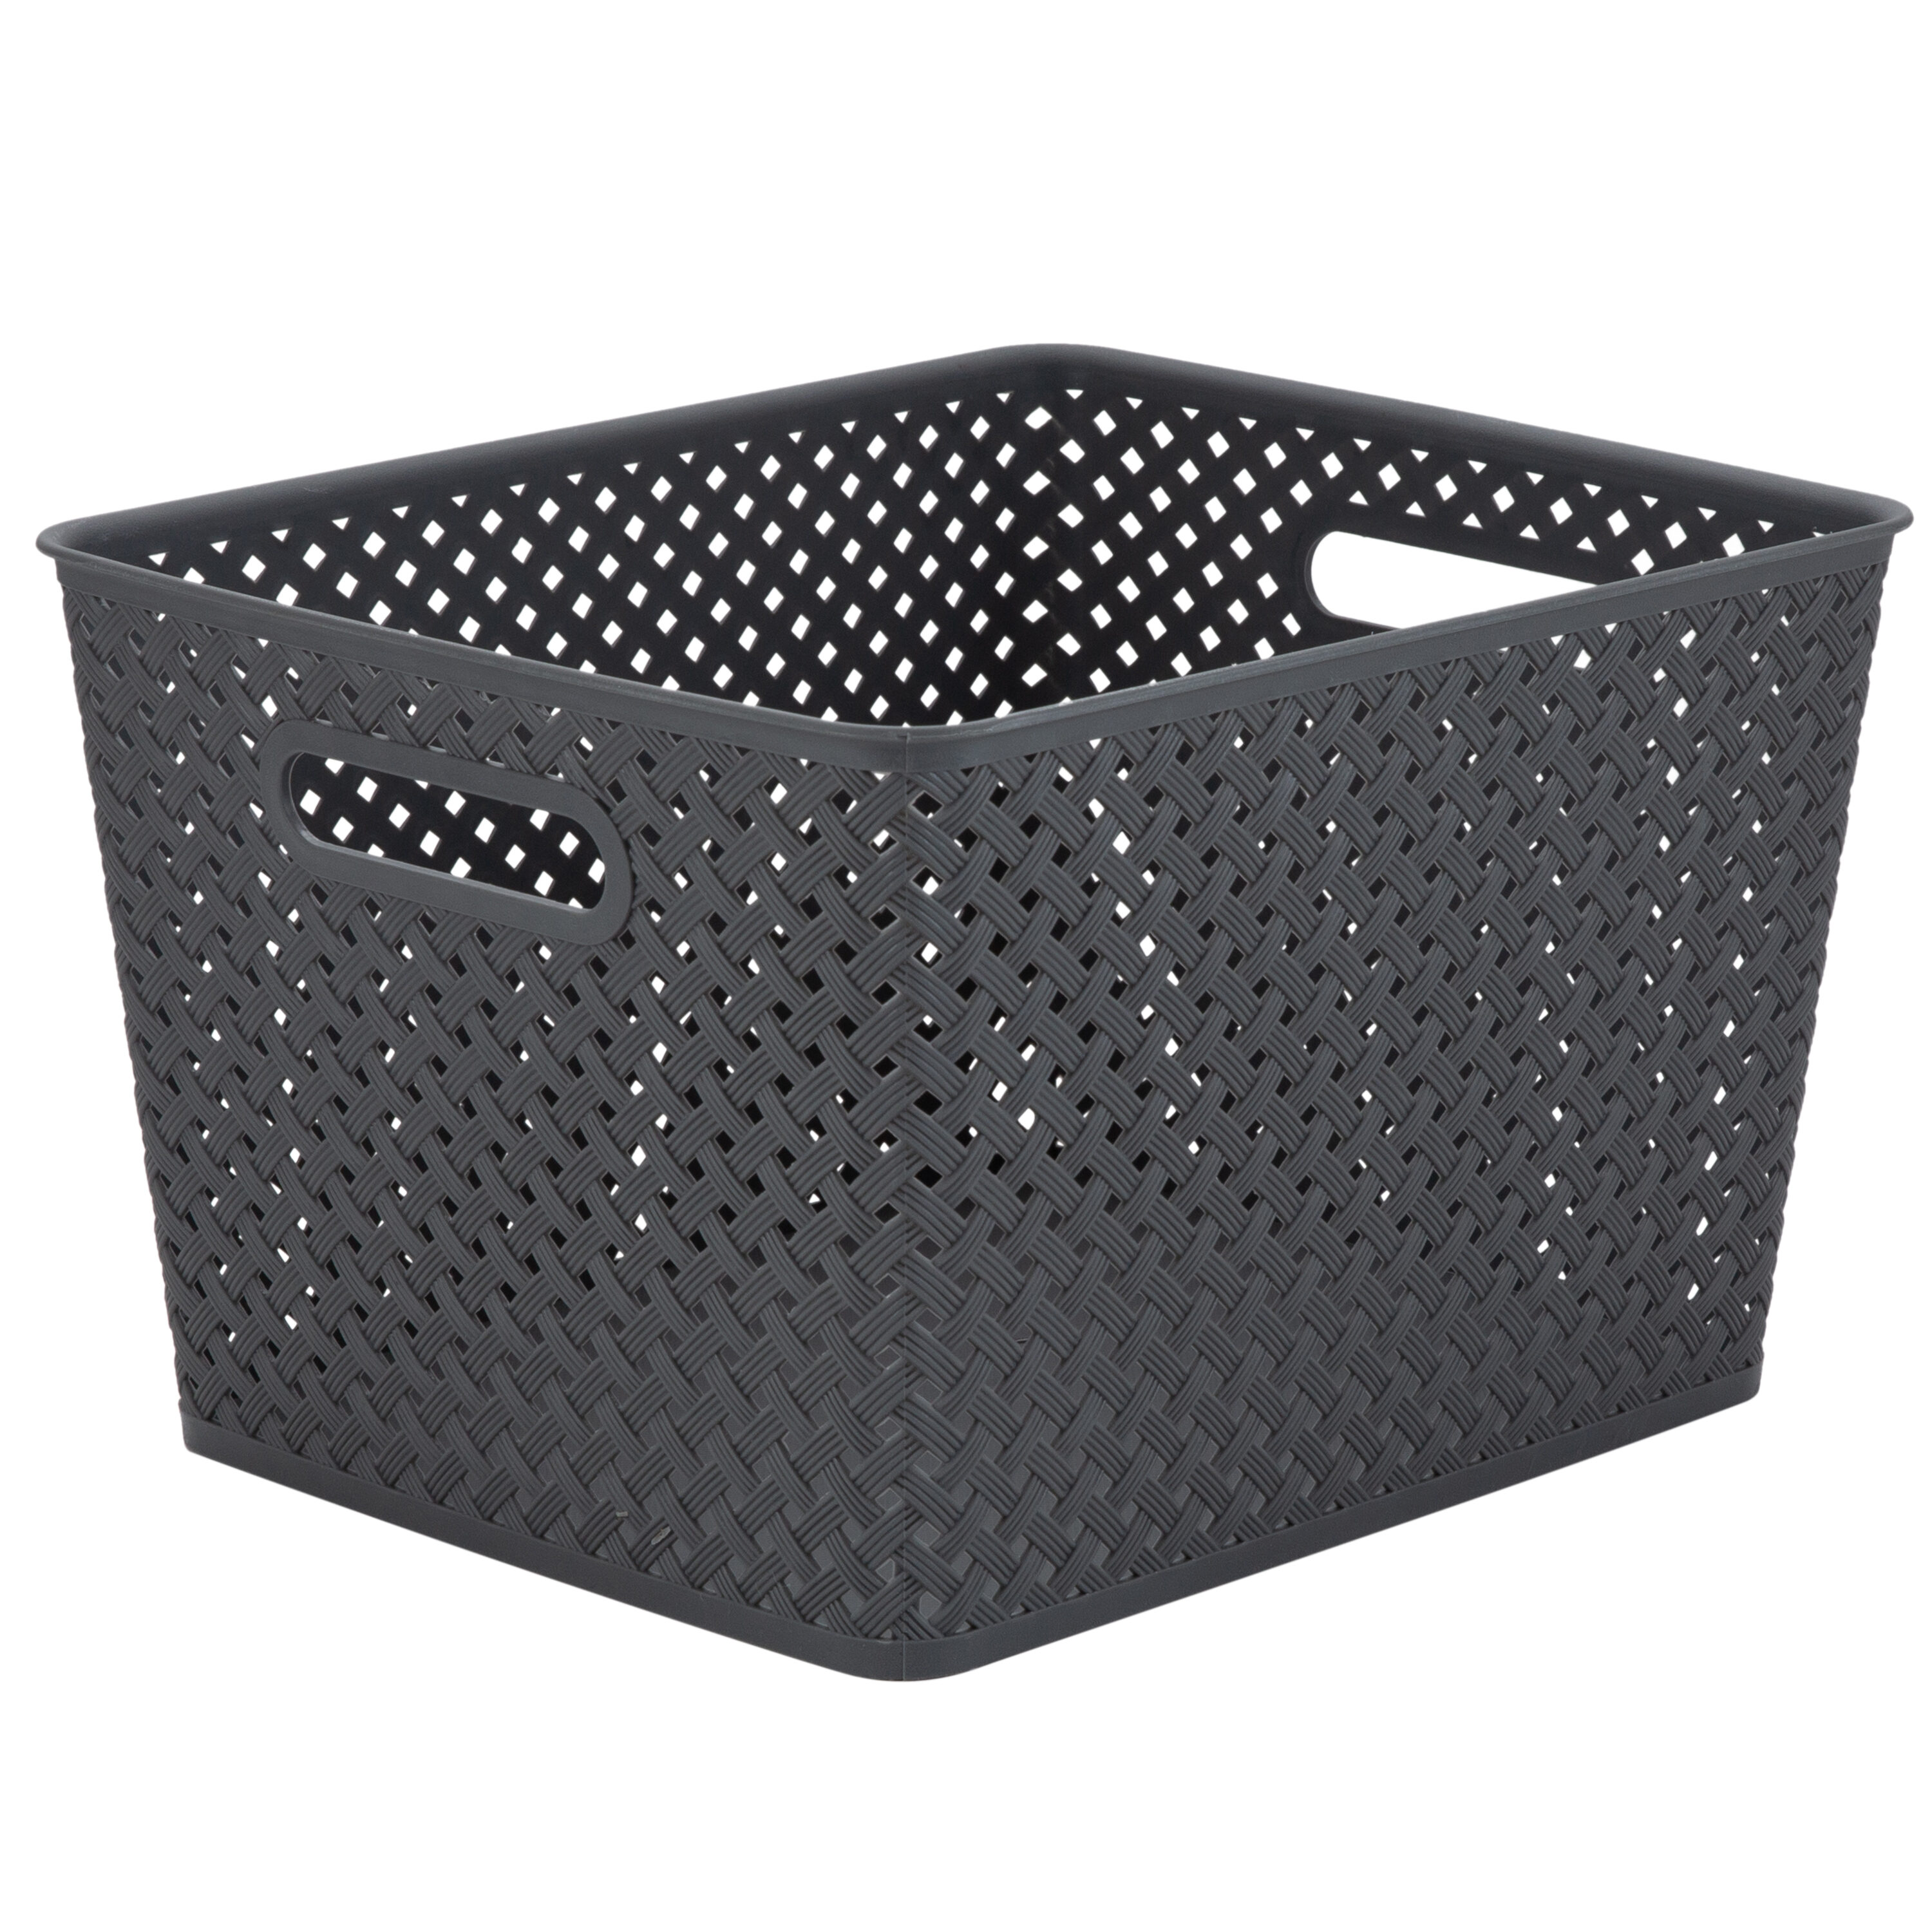 Plastic Bins with Dividers 24 X 10.875 X 8 - Engineered Components